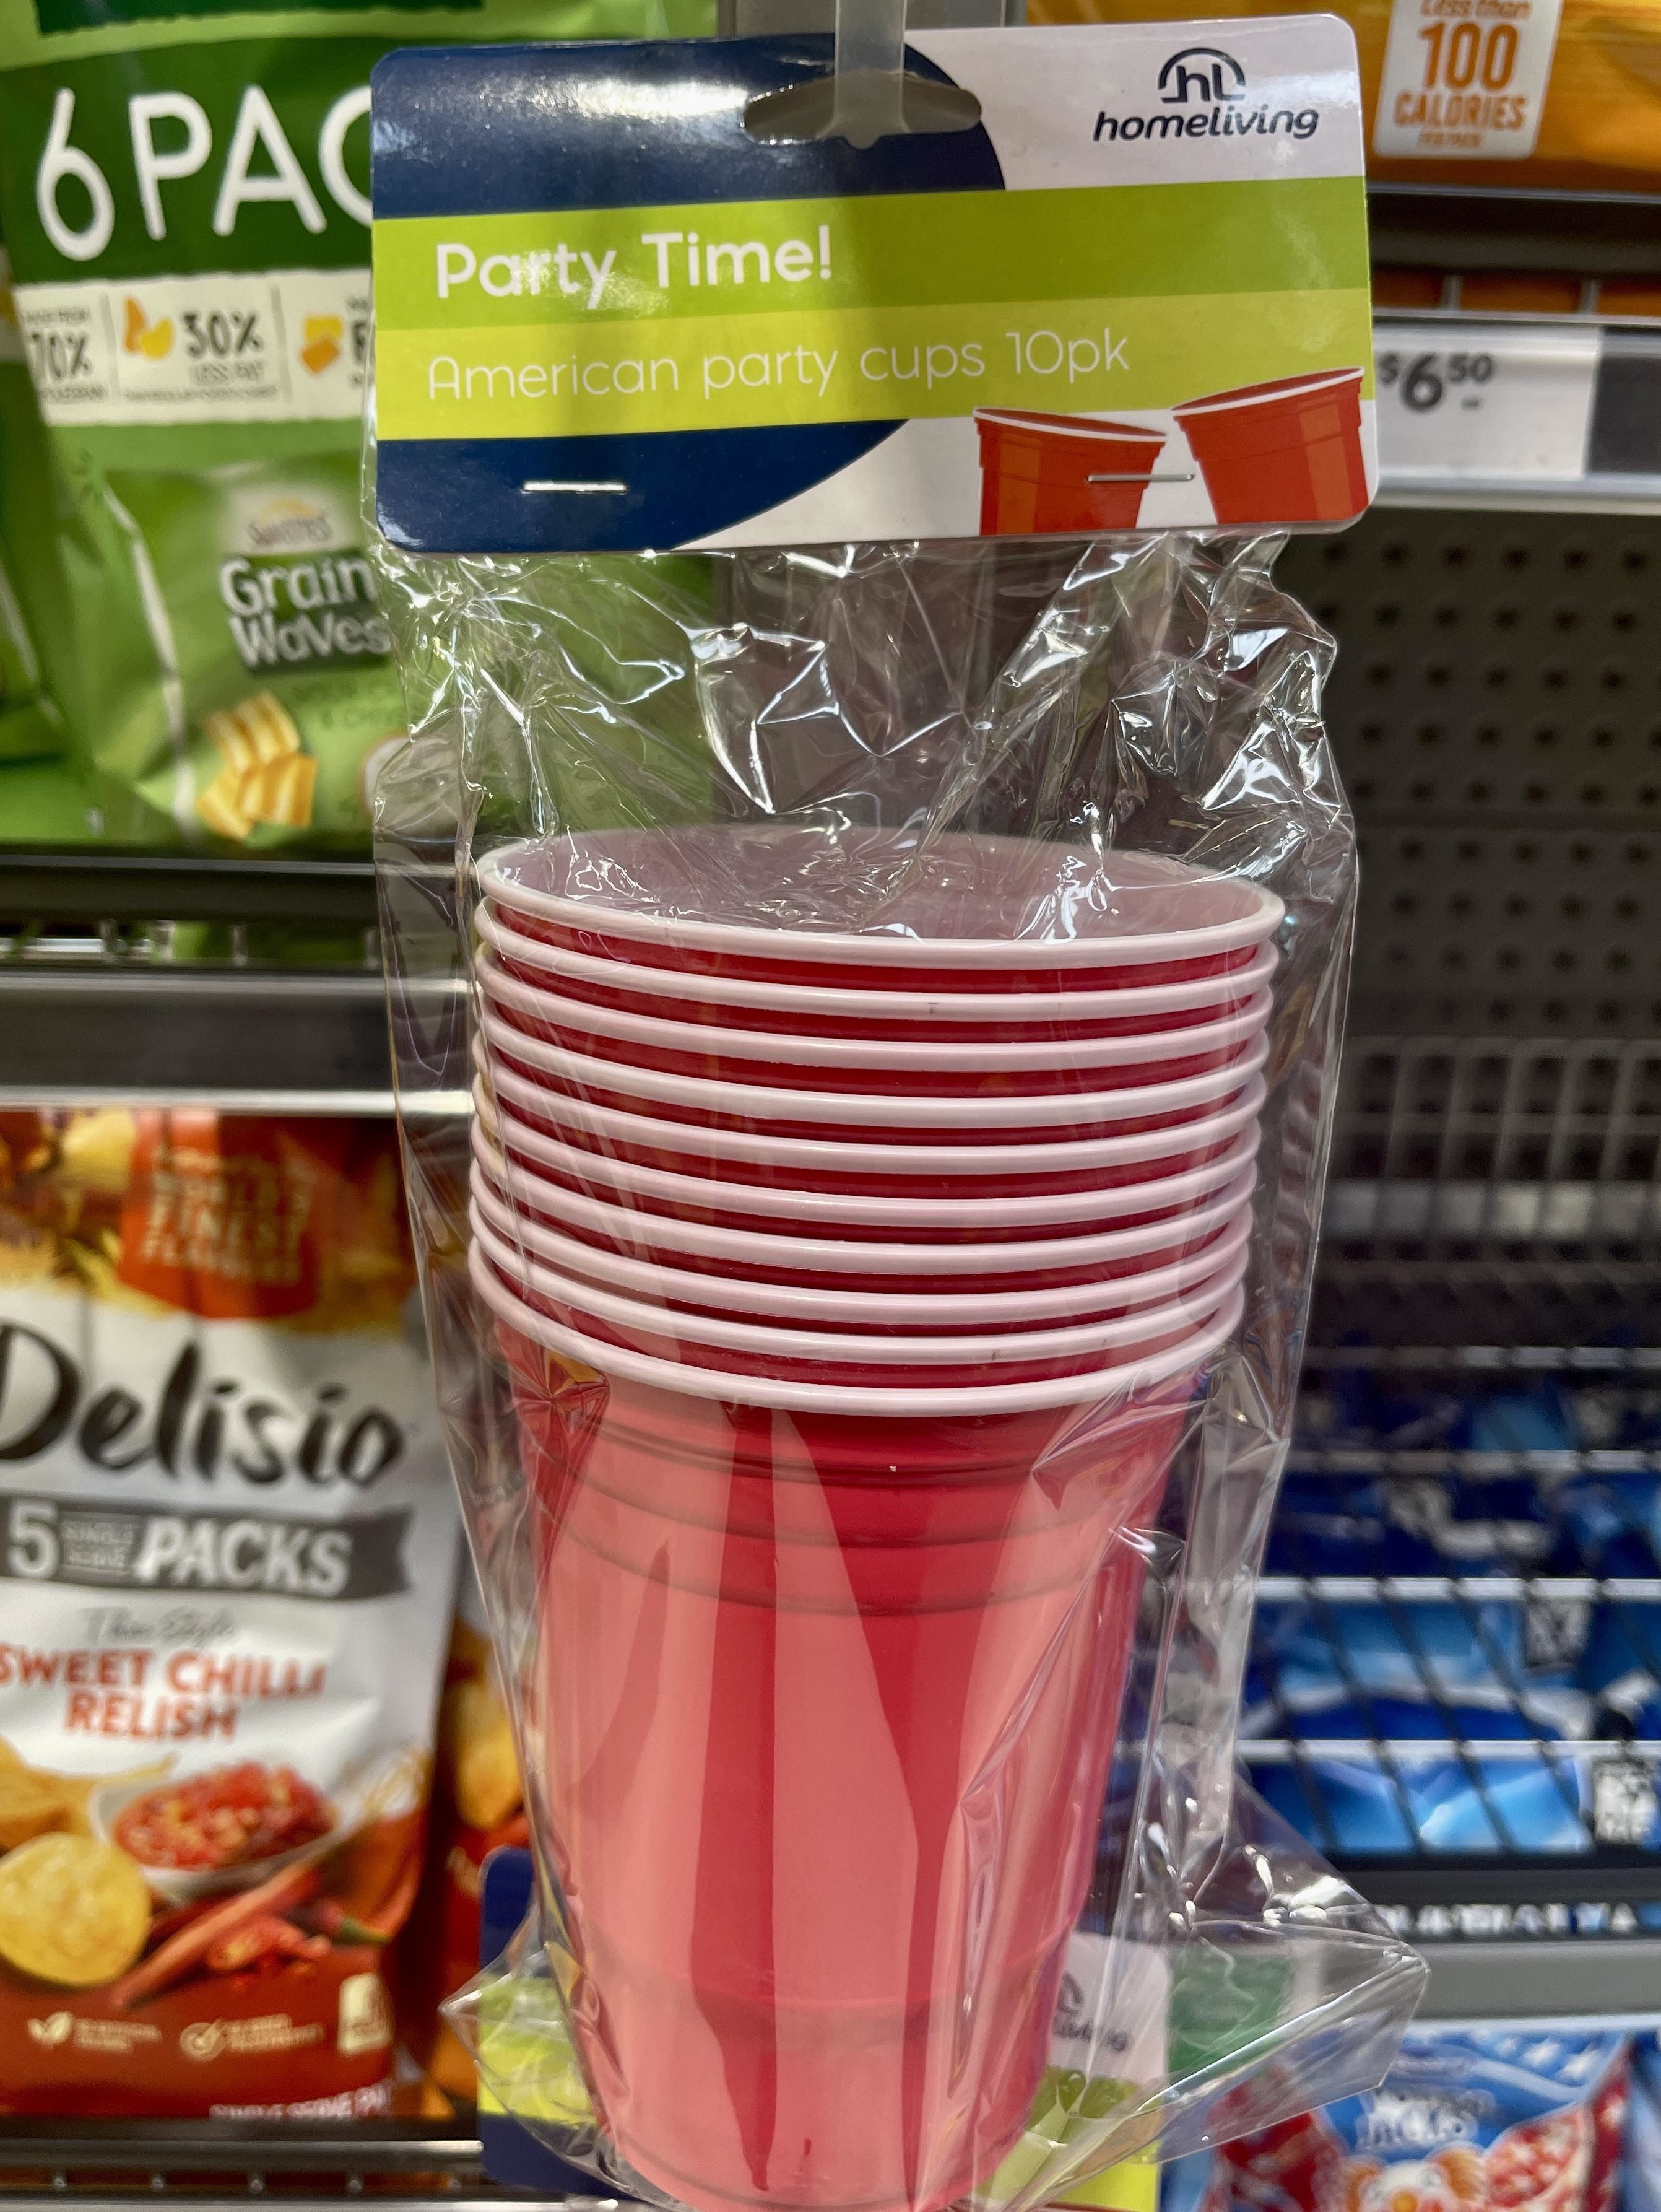 A 10-pack of &quot;American party cups&quot;